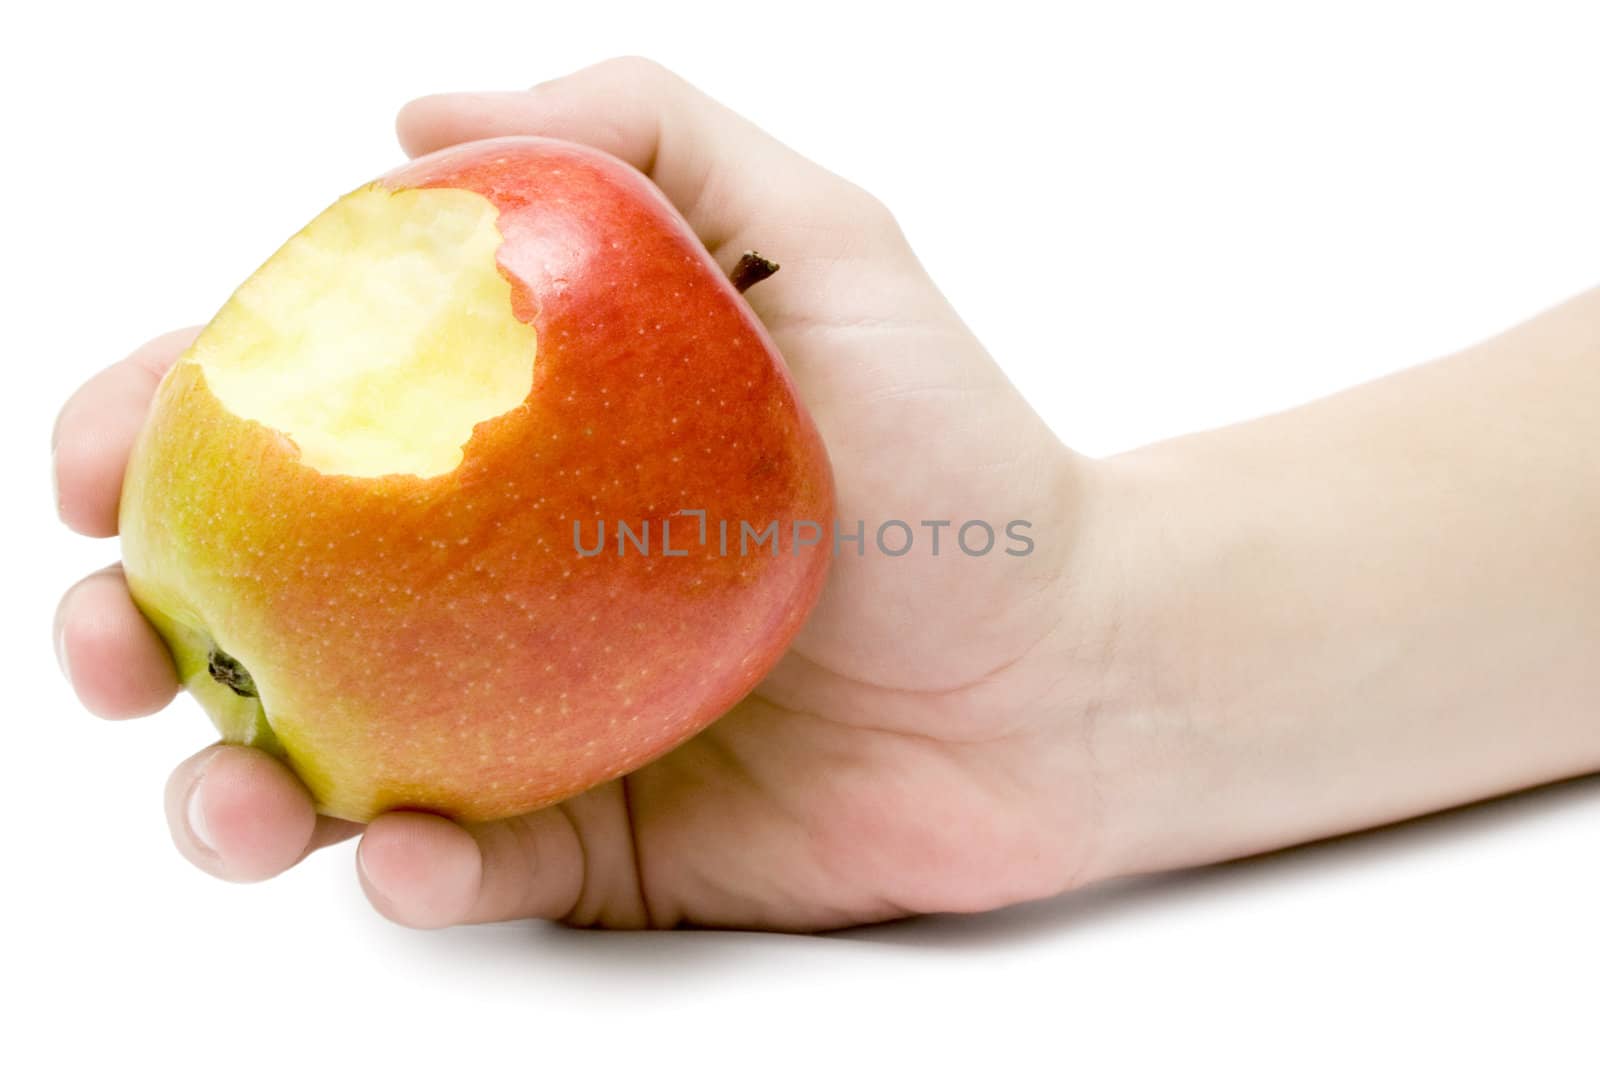 Female hand holding a delicious colorful apple. Isolated on a white background.